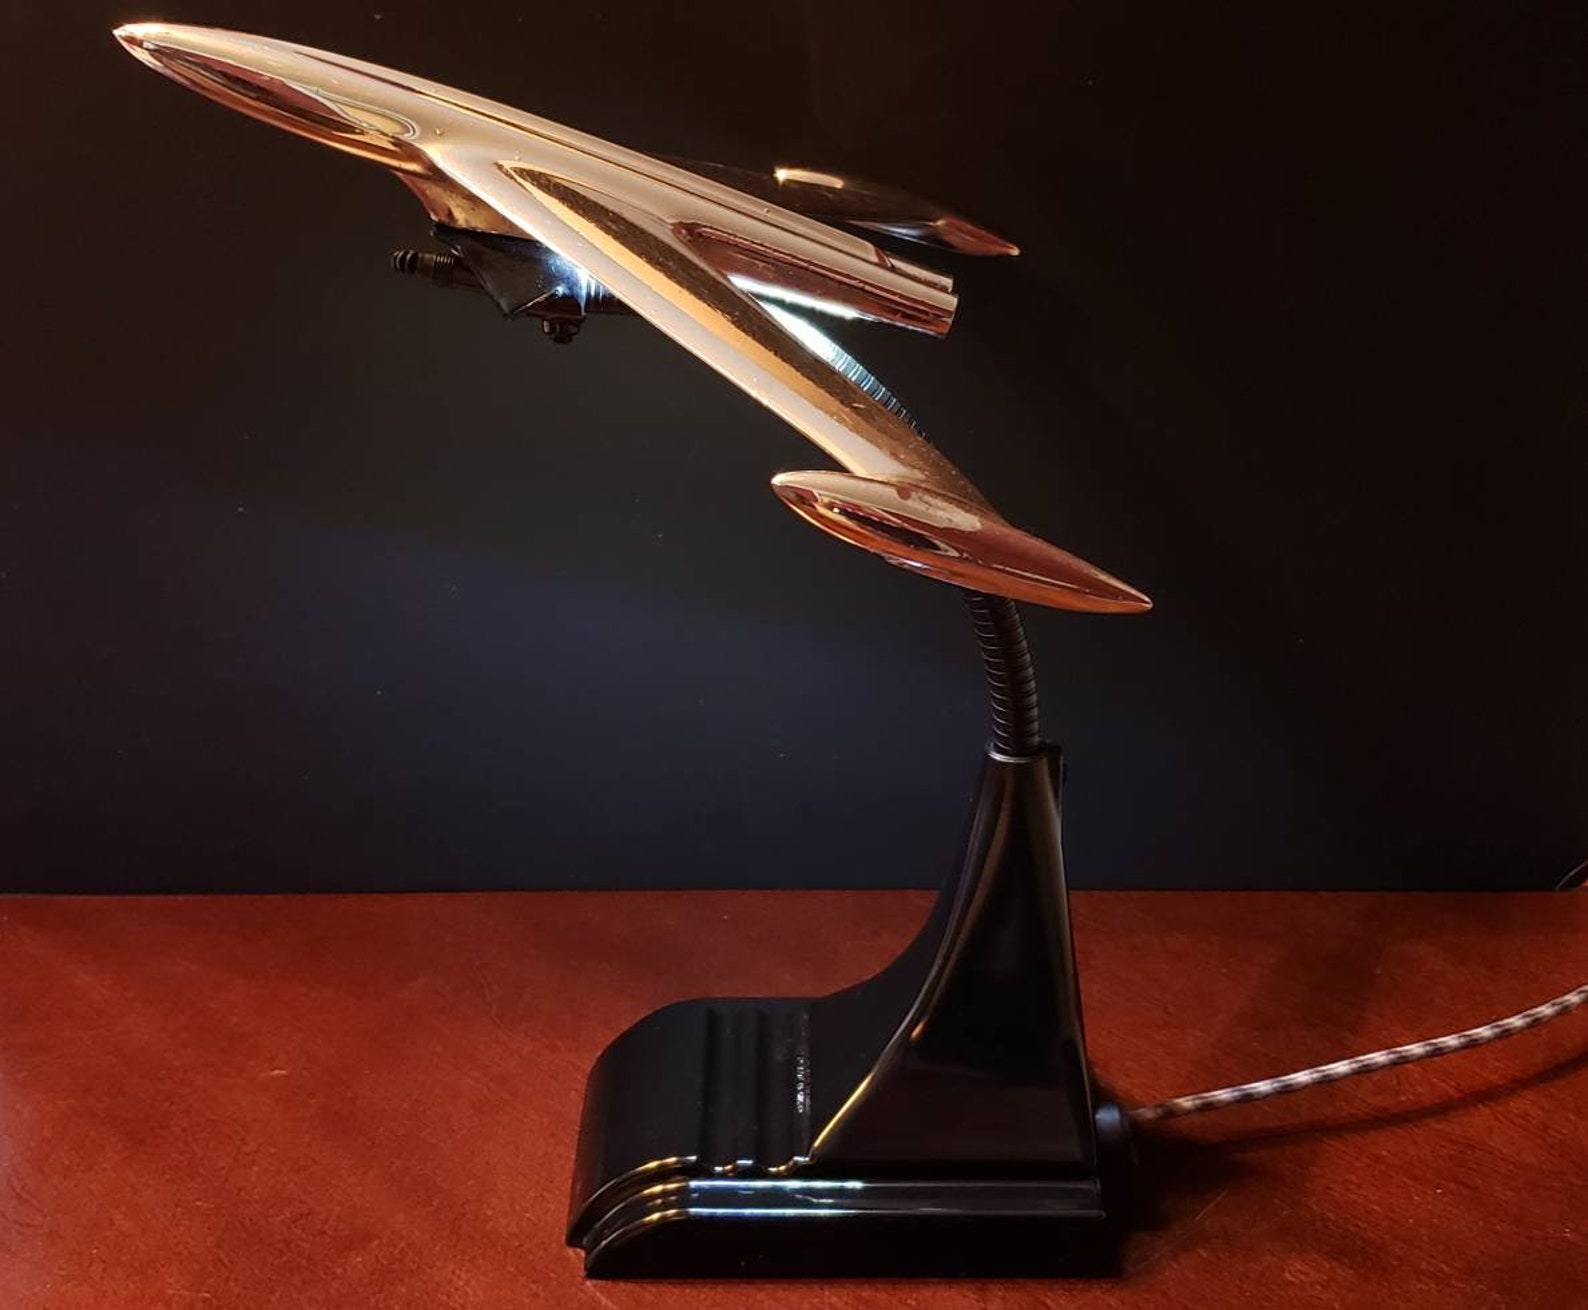 Rocket Plane Lamp made from car hood ornament